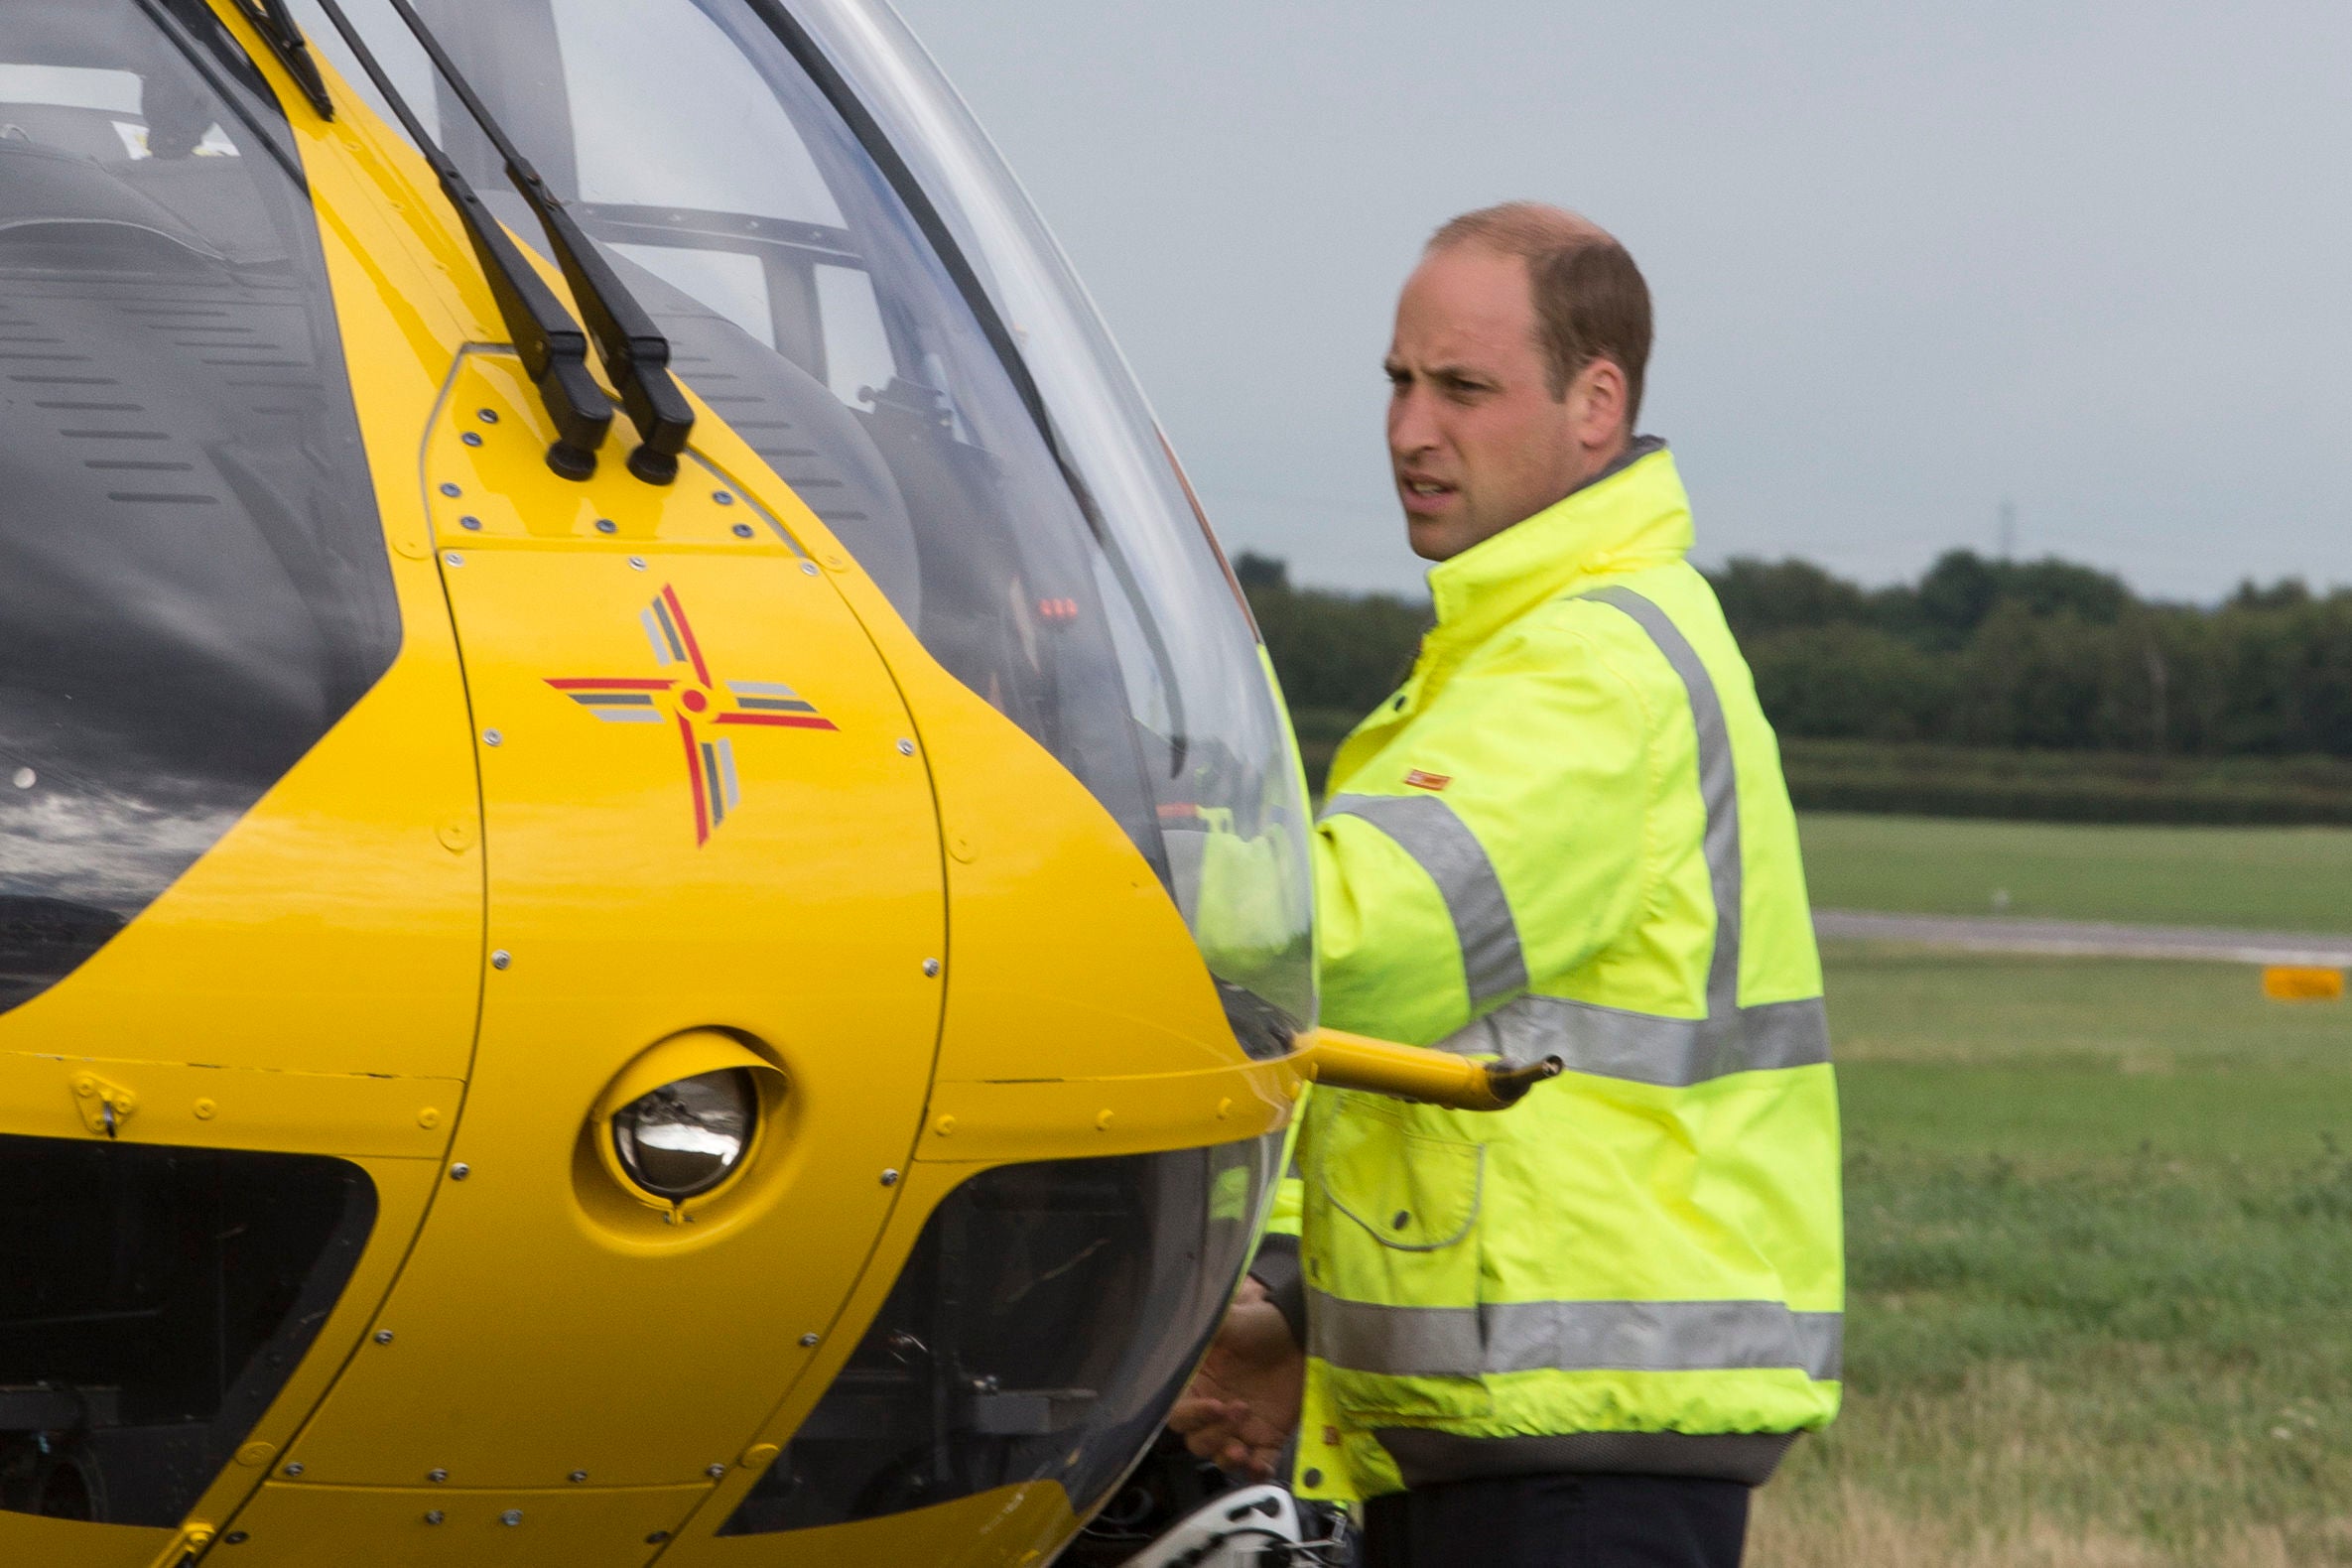 William served for two years as an air ambulance helicopter pilot (Heathcliff O’Malley/The Daily Telegraph)